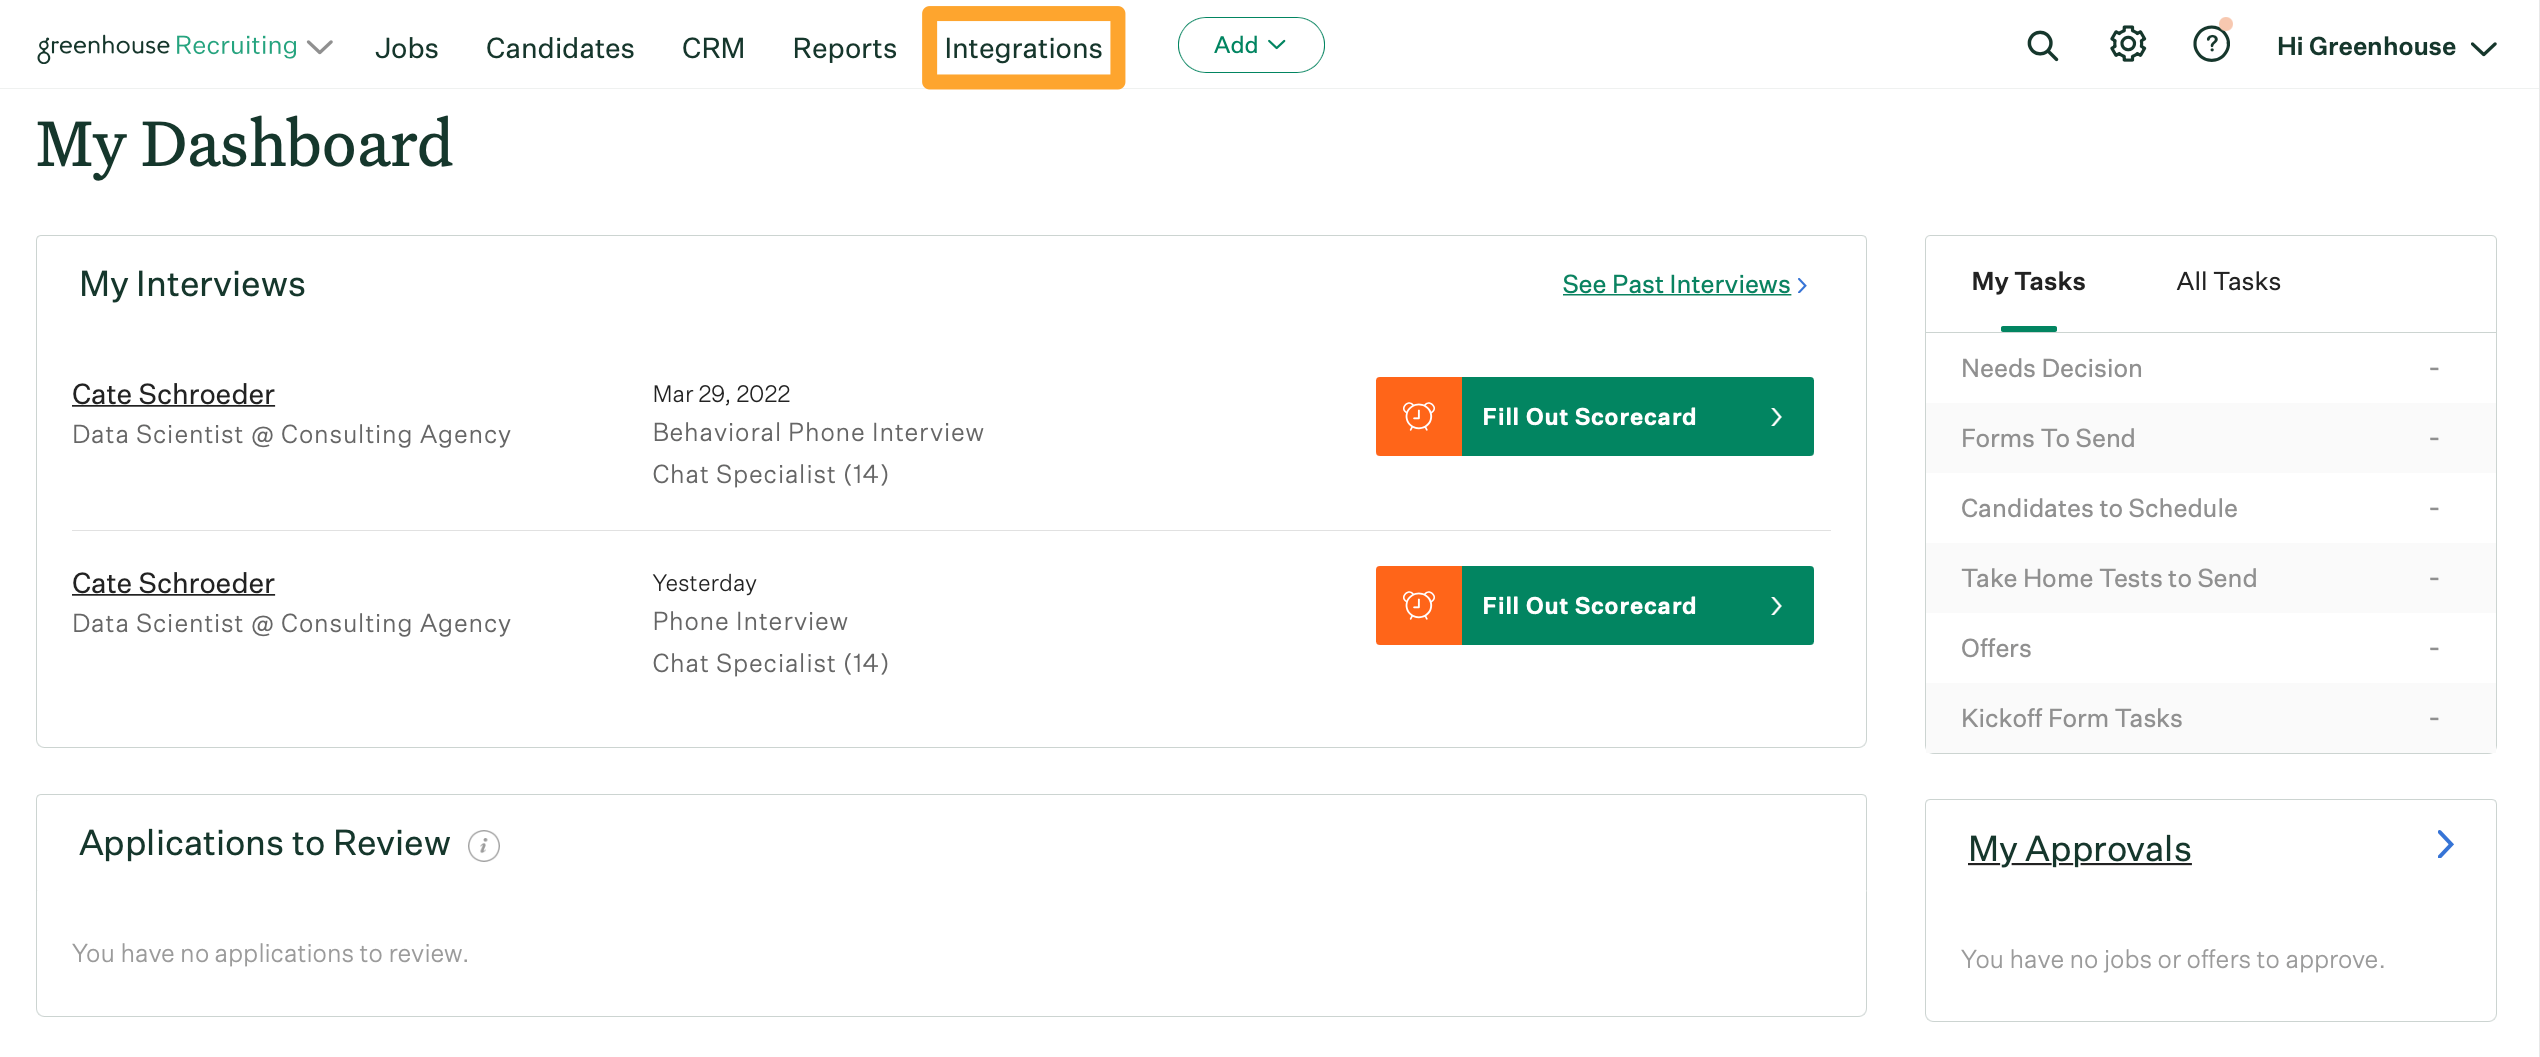 Integrations tab is shown on the Greenhouse Recruiting platform